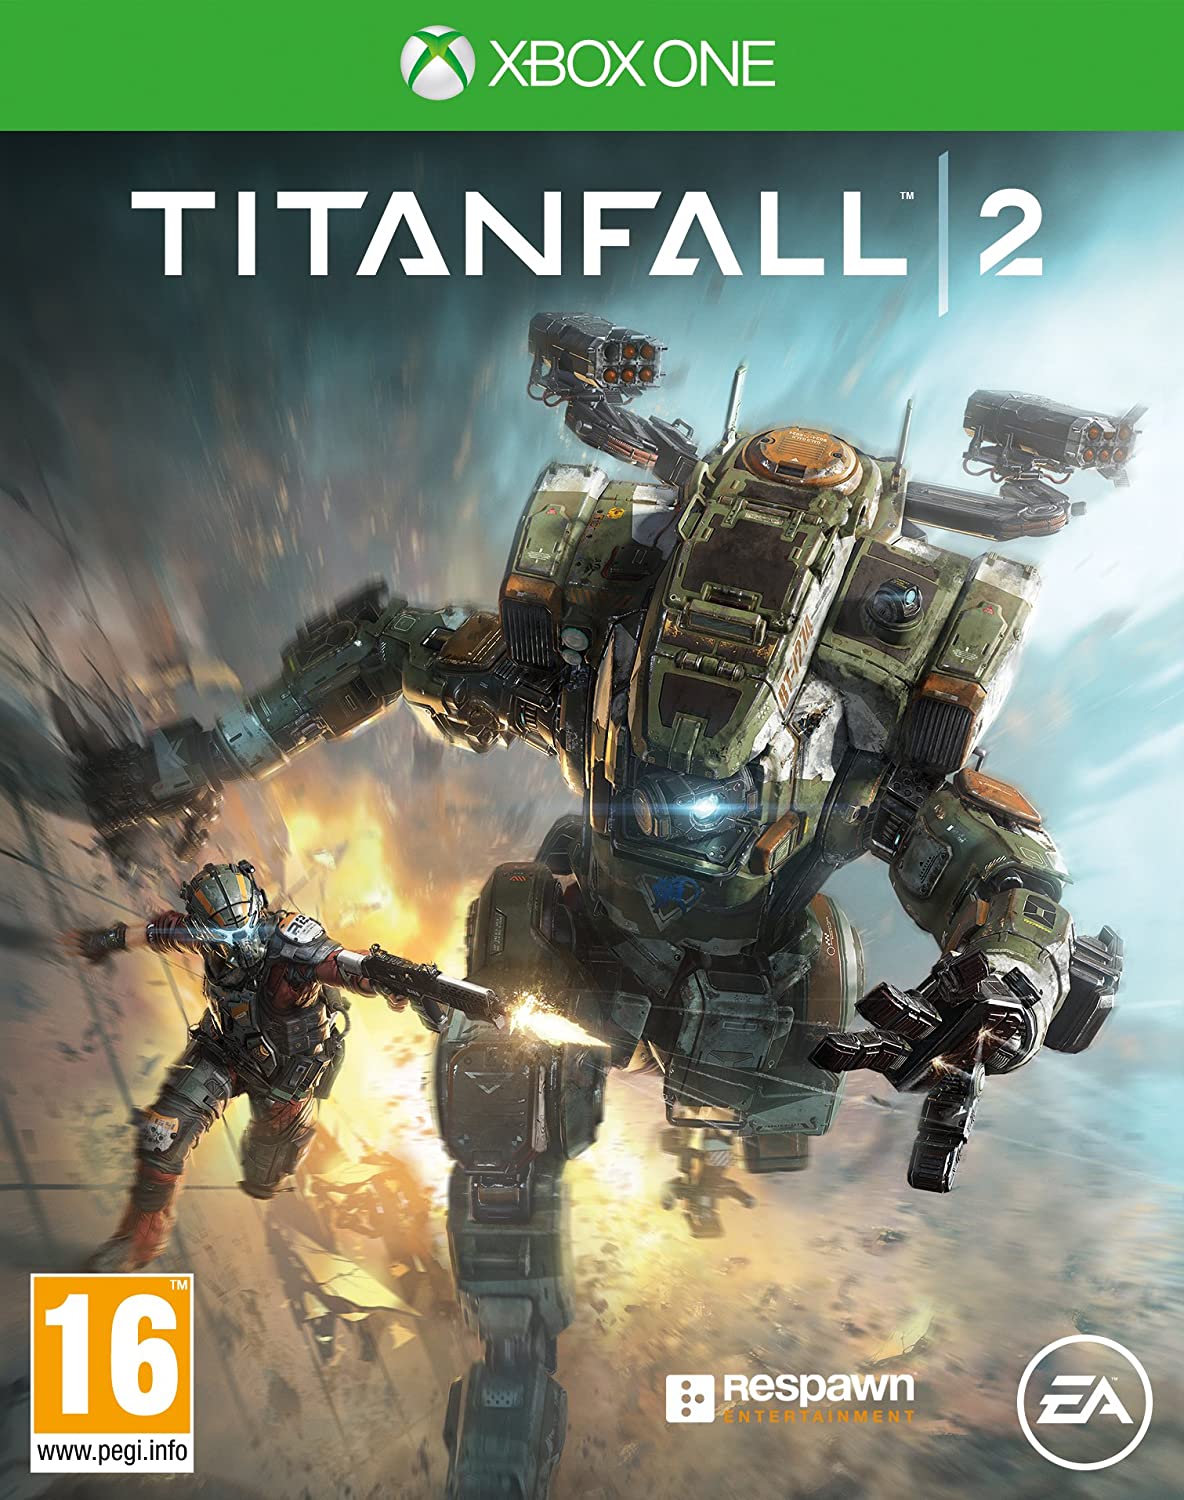 Titanfall 2 (Intl Version) - Action & Shooter - Xbox One